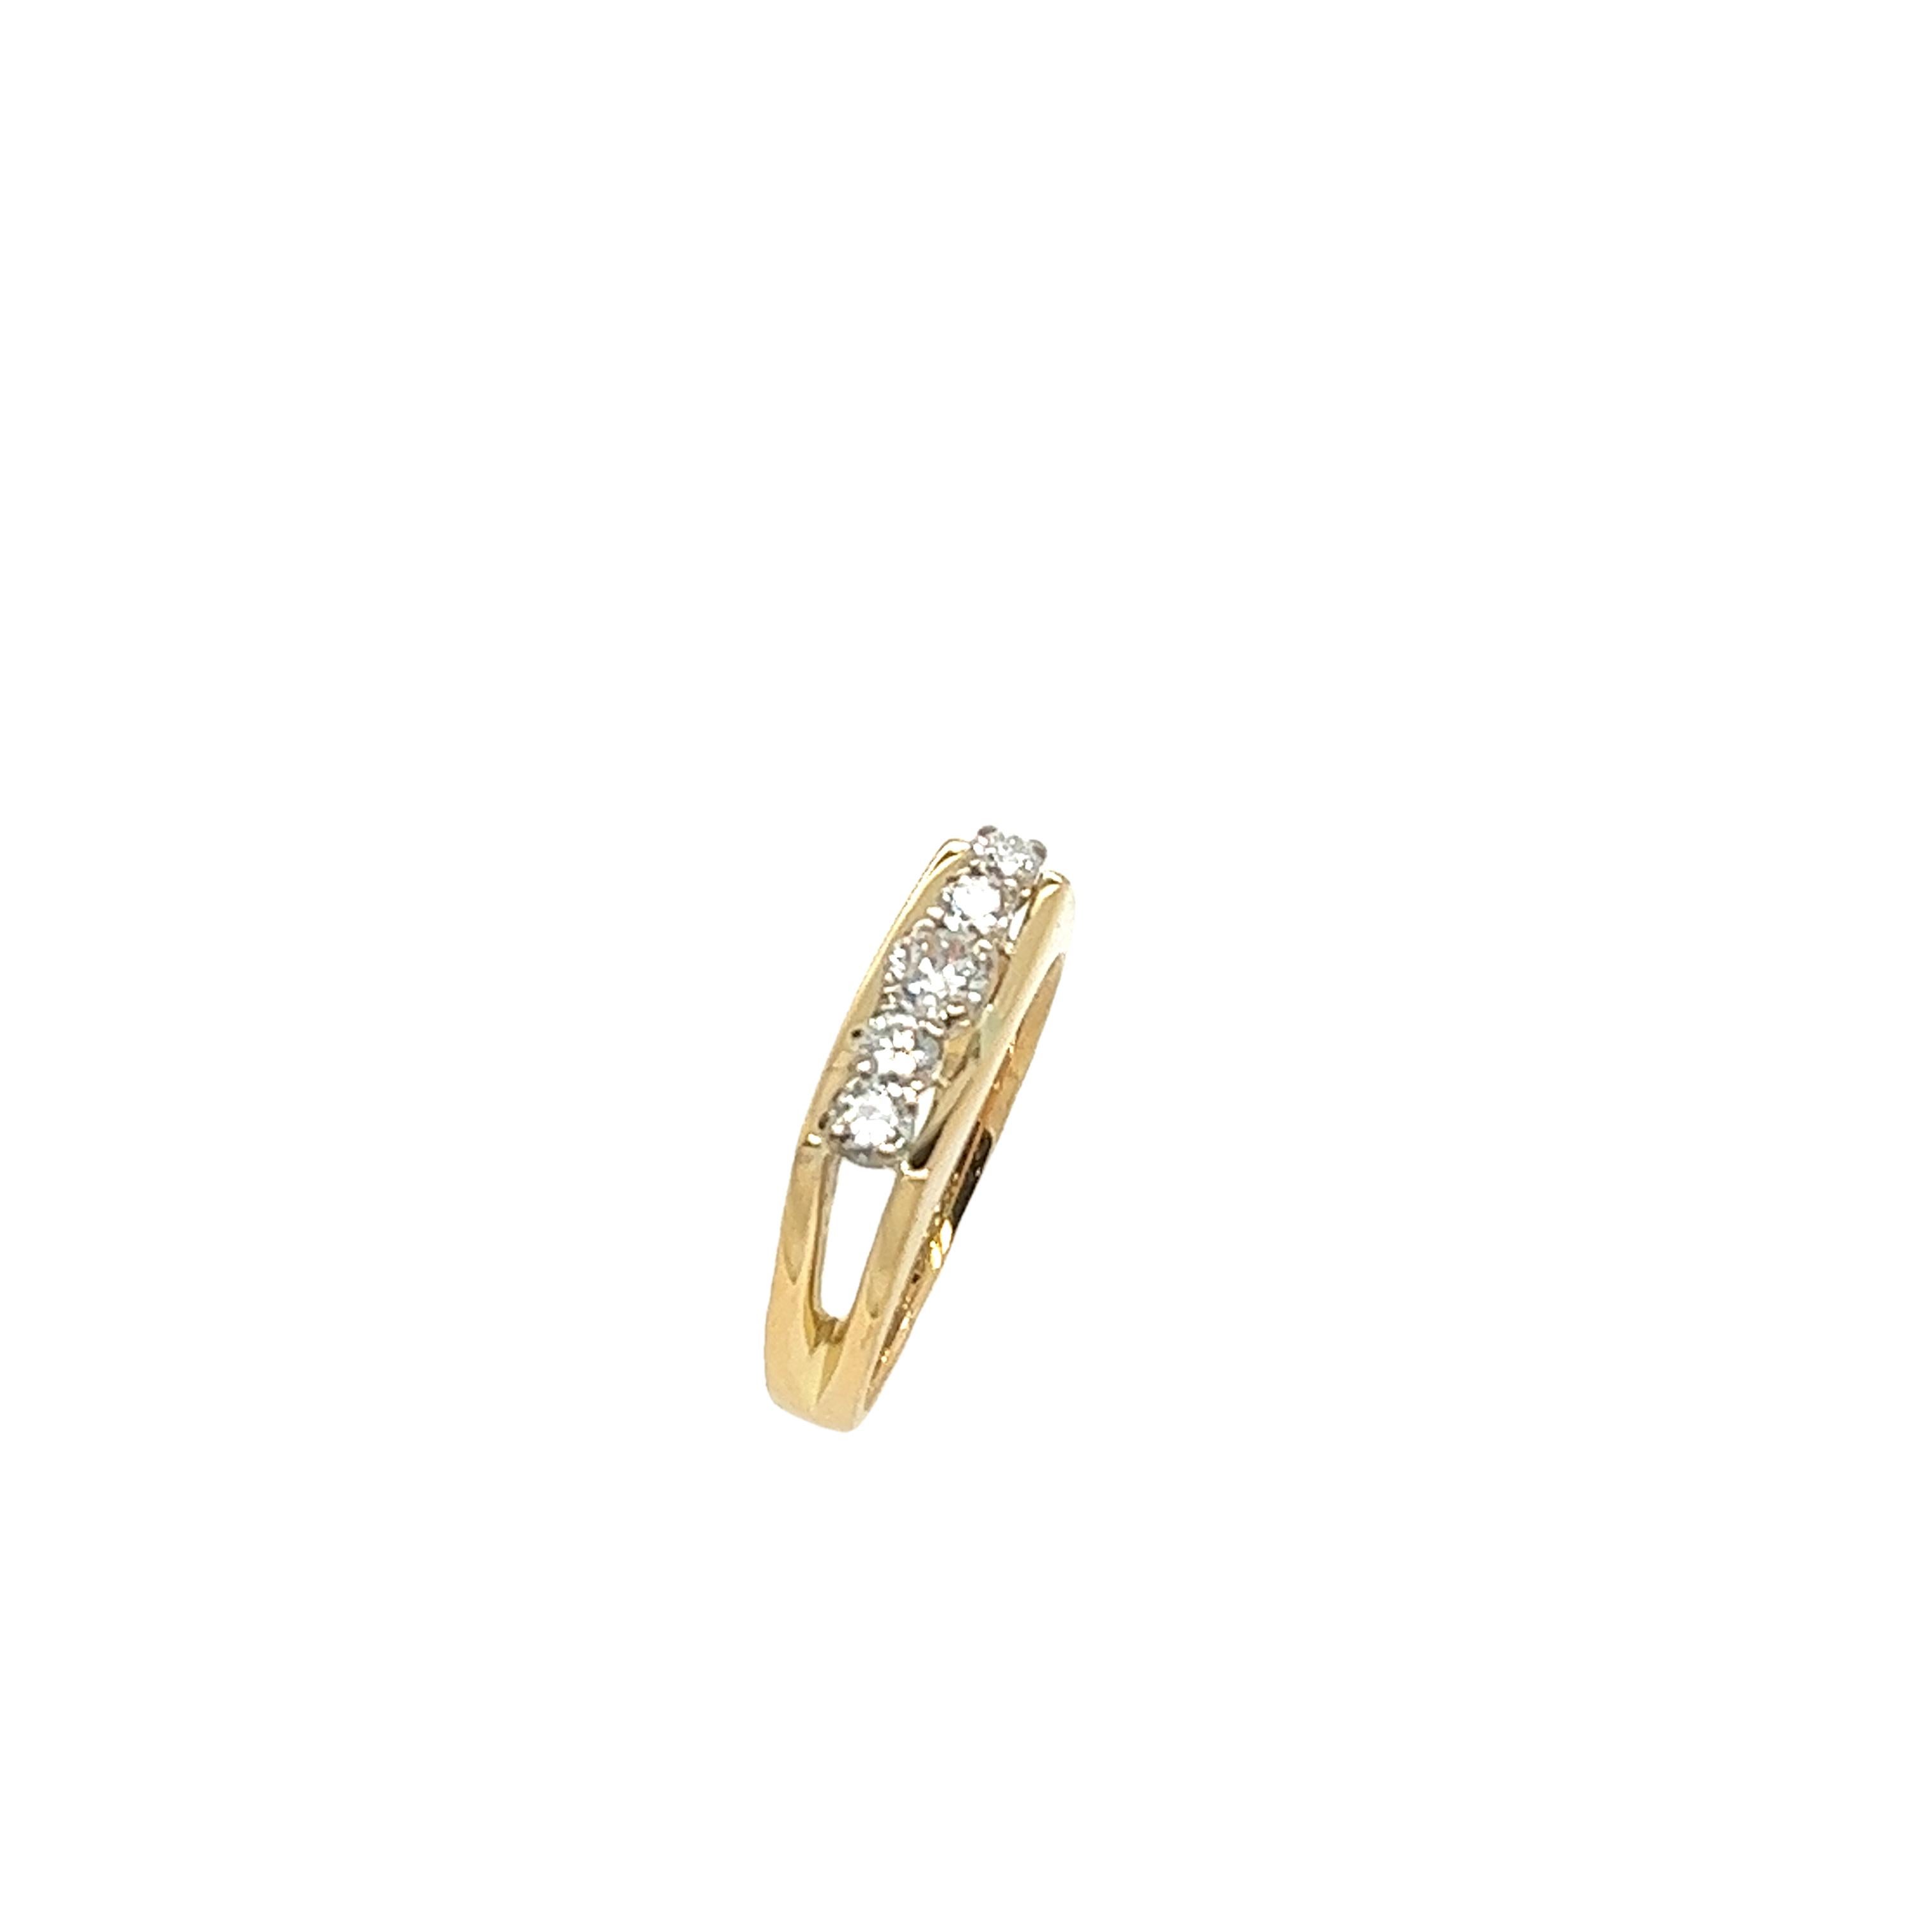 An elegant 5-stone diamond ring, 
set with 5 round old cut diamonds, 
in an 18ct yellow gold setting.
Total Diamond Weight: 0.35ct
Diamond Colour: G
Diamond Clarity: VSI
Width of Band: 2.35mm
Width of Head: 5.21mm
Length of Head: 13.68mm
Total